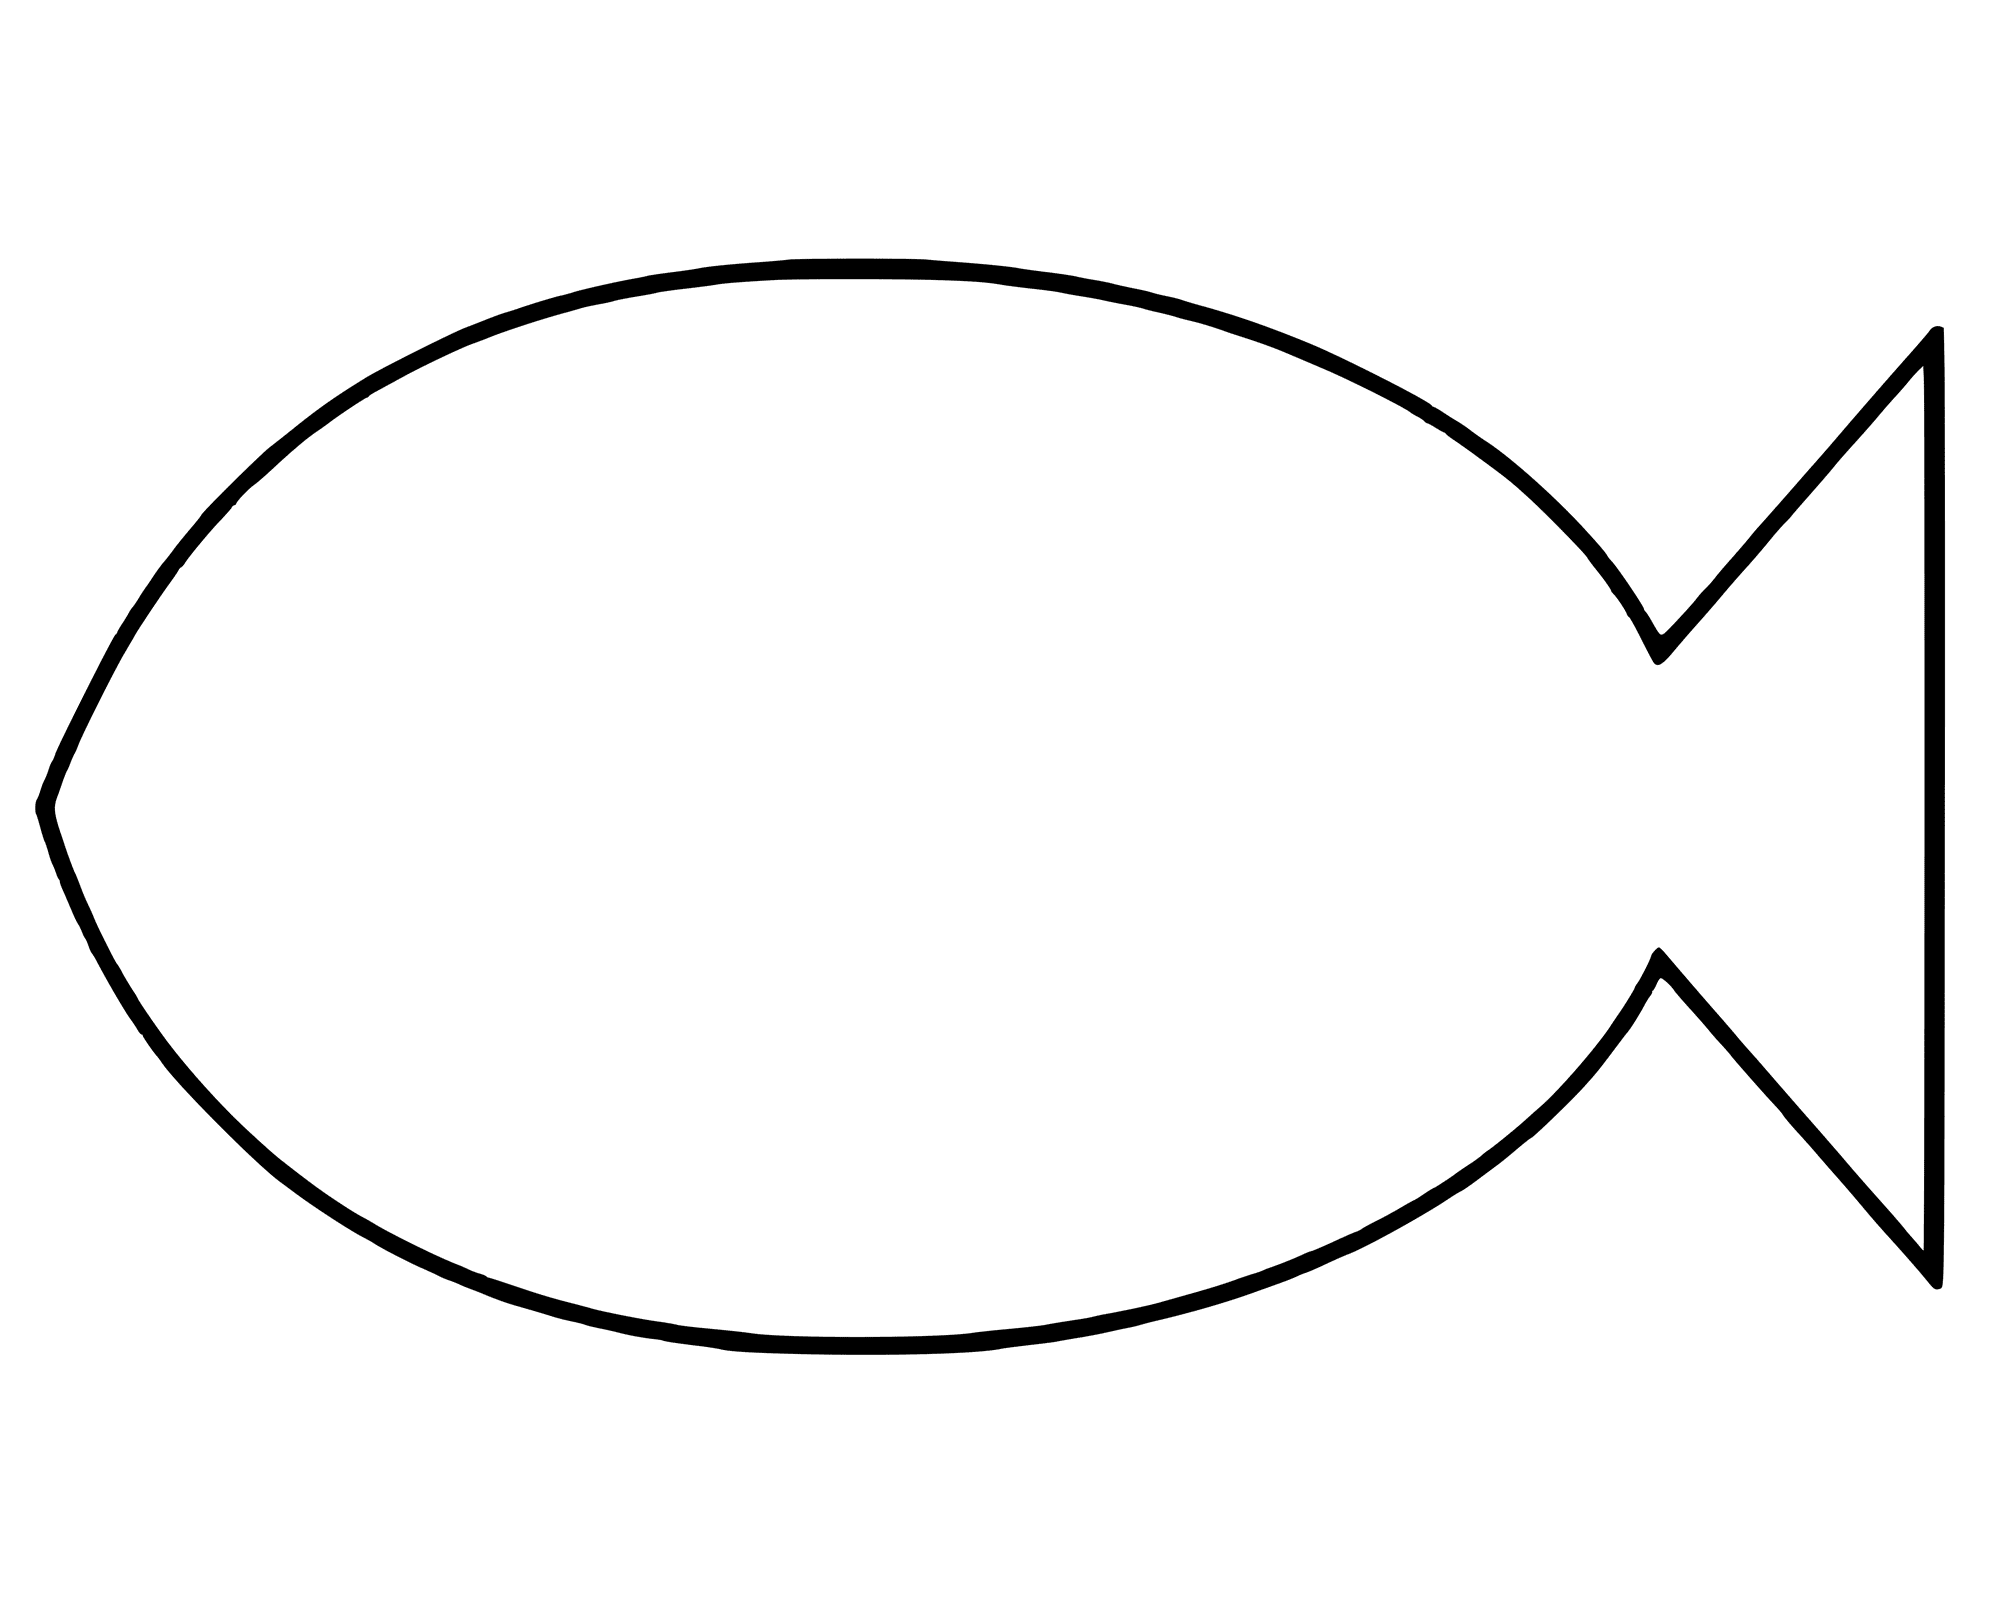 Simple fish outline.